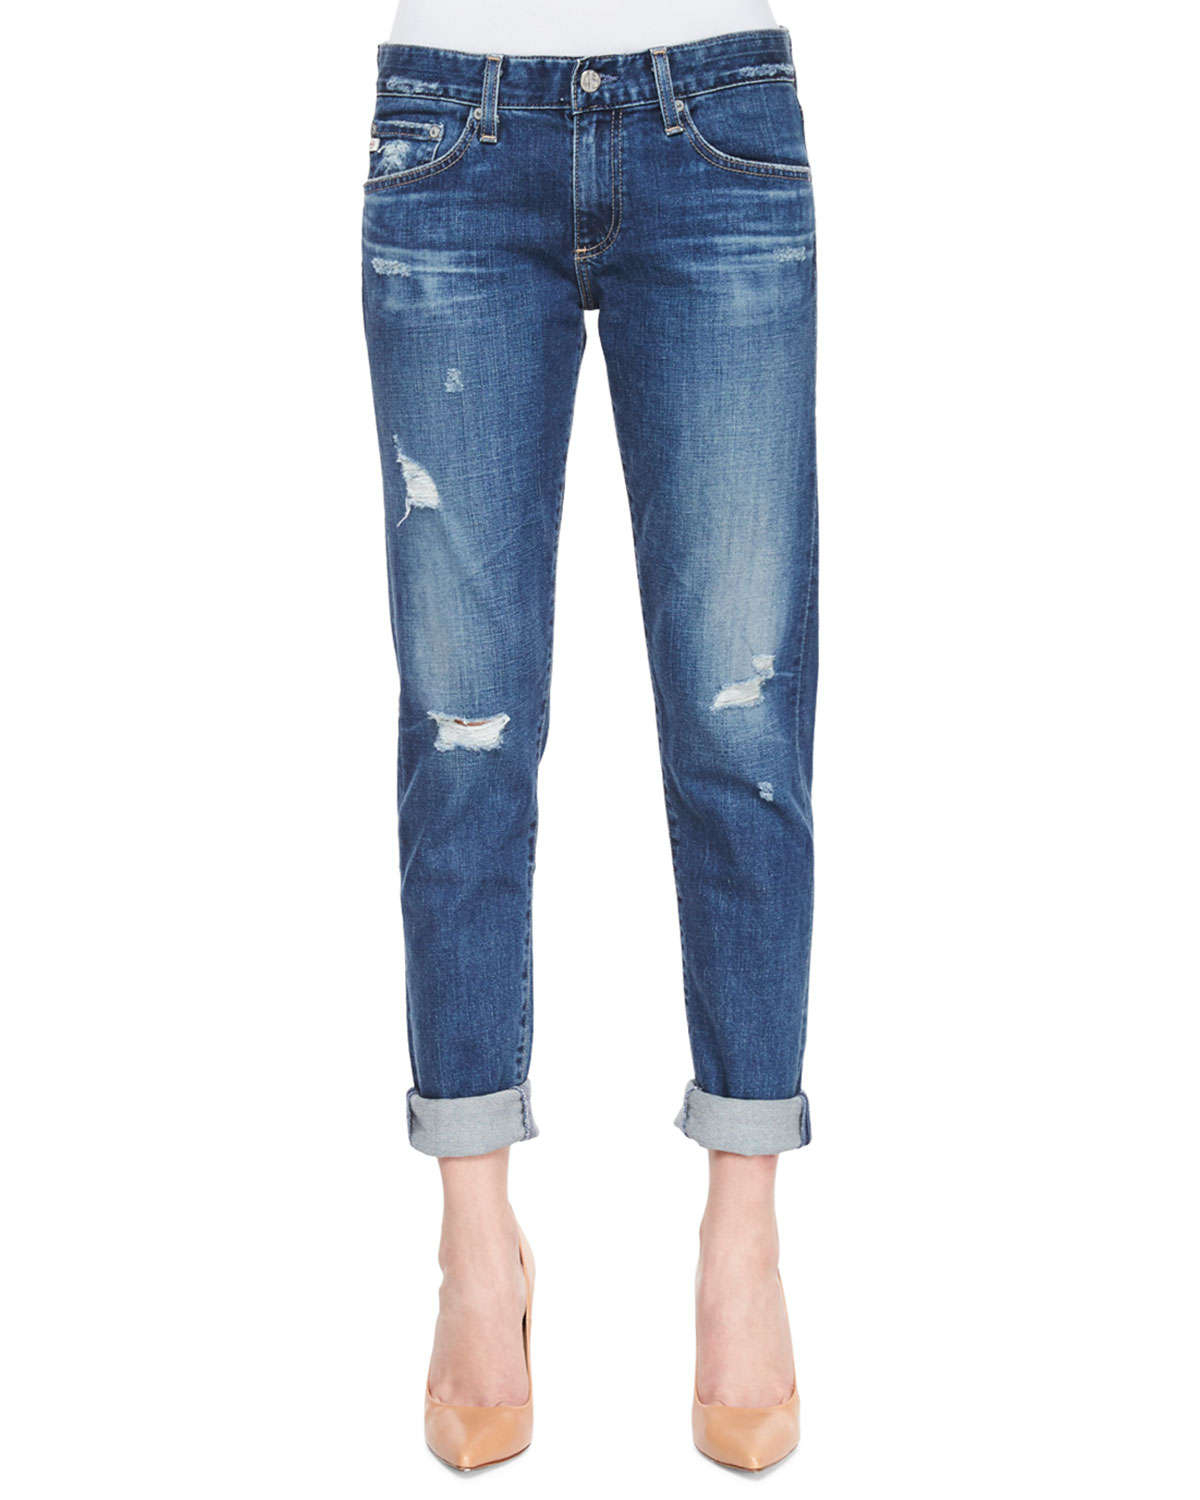 Ag adriano goldschmied Nikki Relaxed Skinny Jeans in Blue (denim) | Lyst